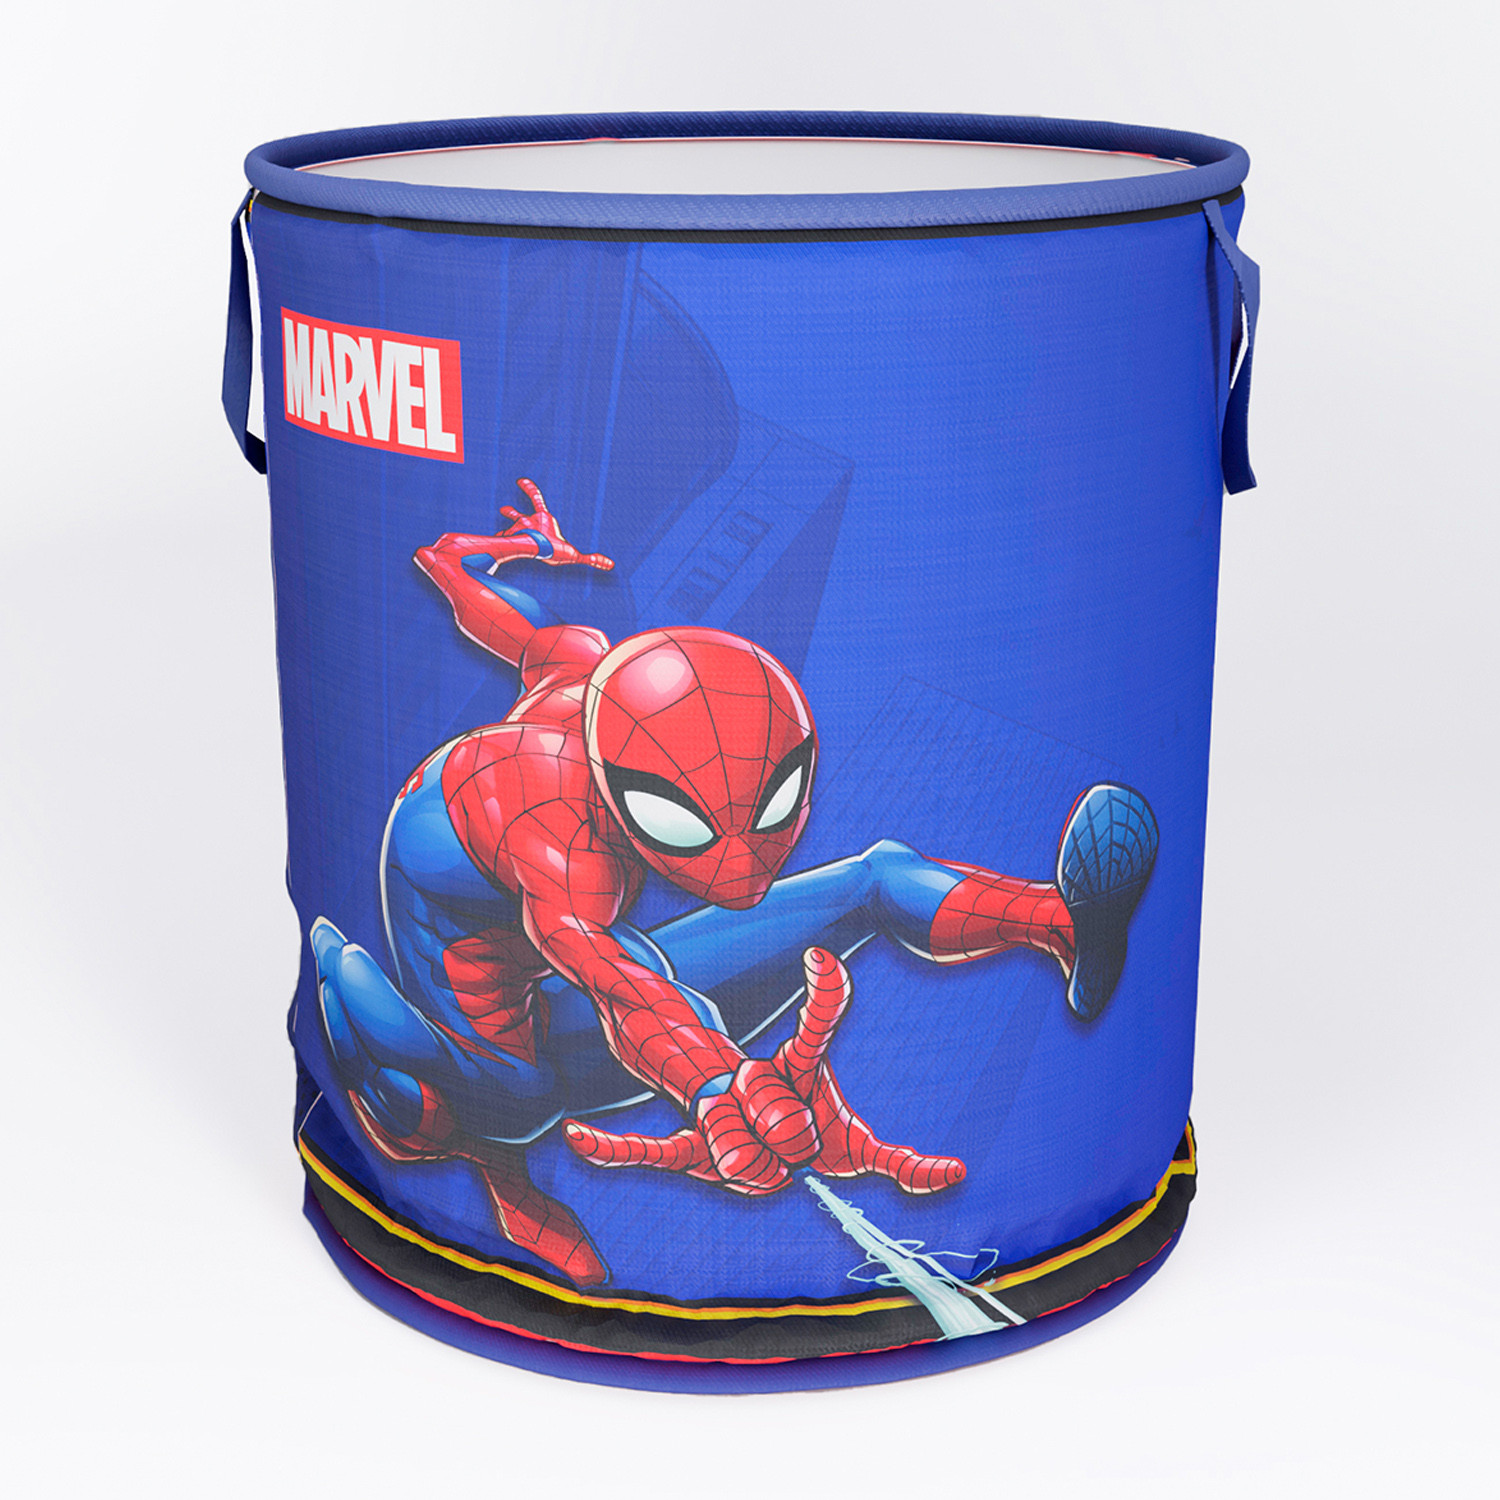 Kuber Industries Marvel Spiderman Print Round Laundry Basket|Polyester Clothes Hamper|Waterproof & Foldable Round Laundry Bag with Handle,45 Ltr.(Navy Blue)